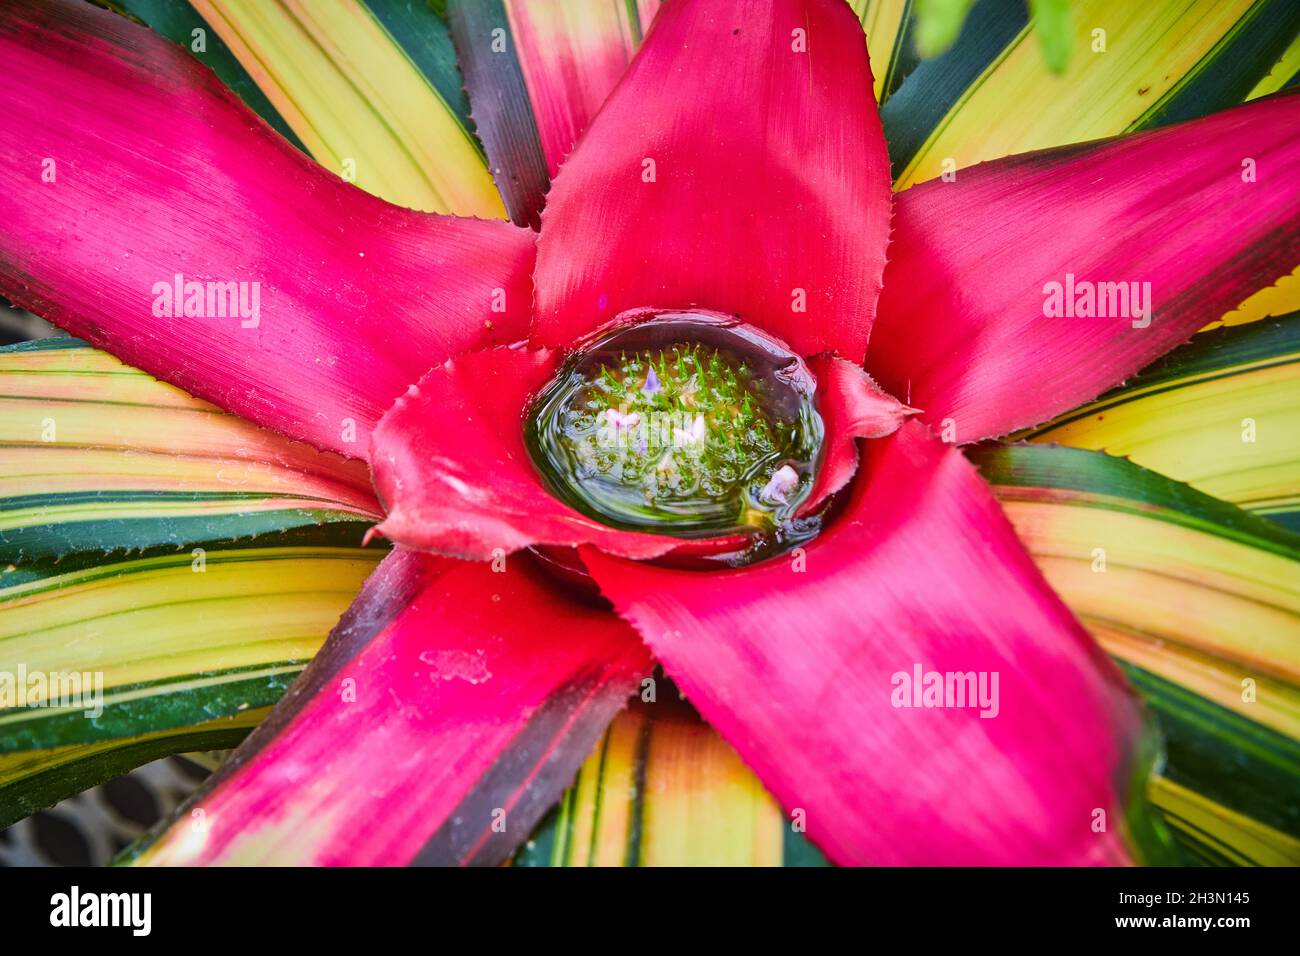 Colorful pink bromeliad plant collecting water in center Stock Photo